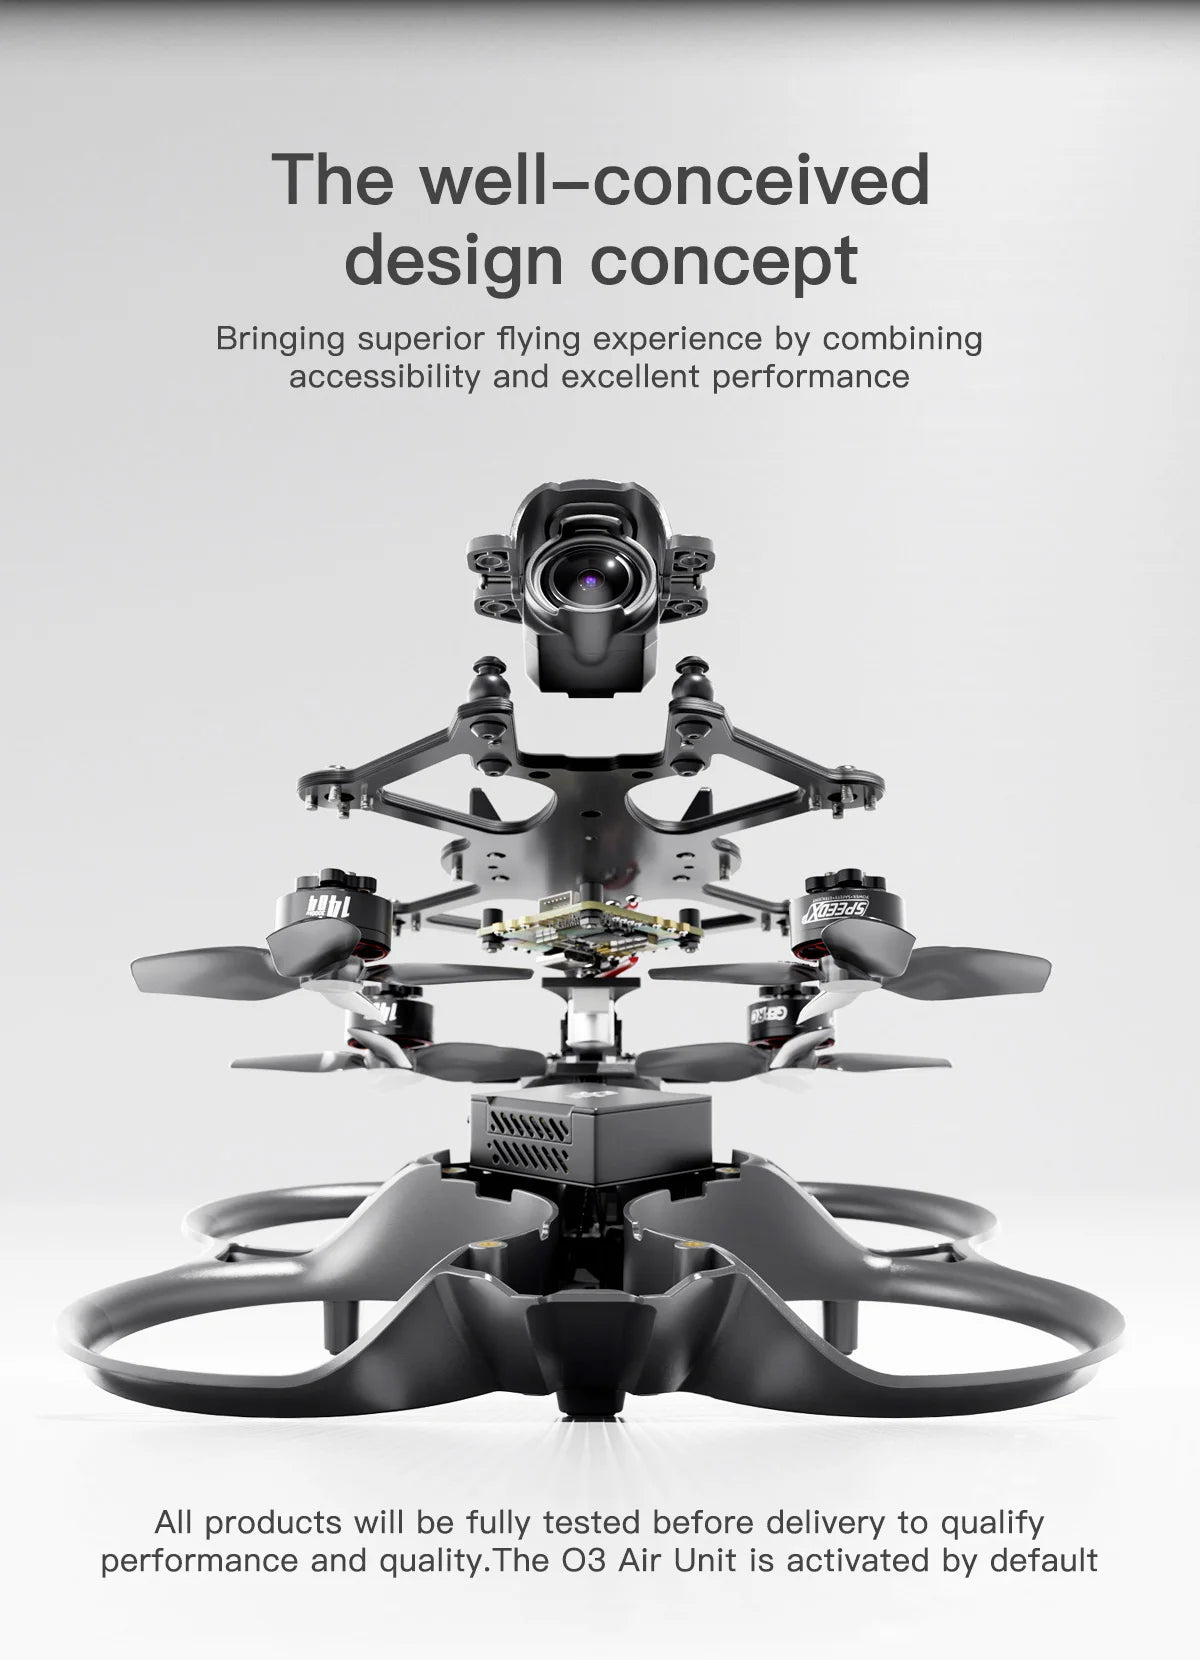 GEPRC Cinebot25 WTFPV FPV Drone, the well-conceived design concept Bringing superior flying experience by combining accessibility and excellent performance 